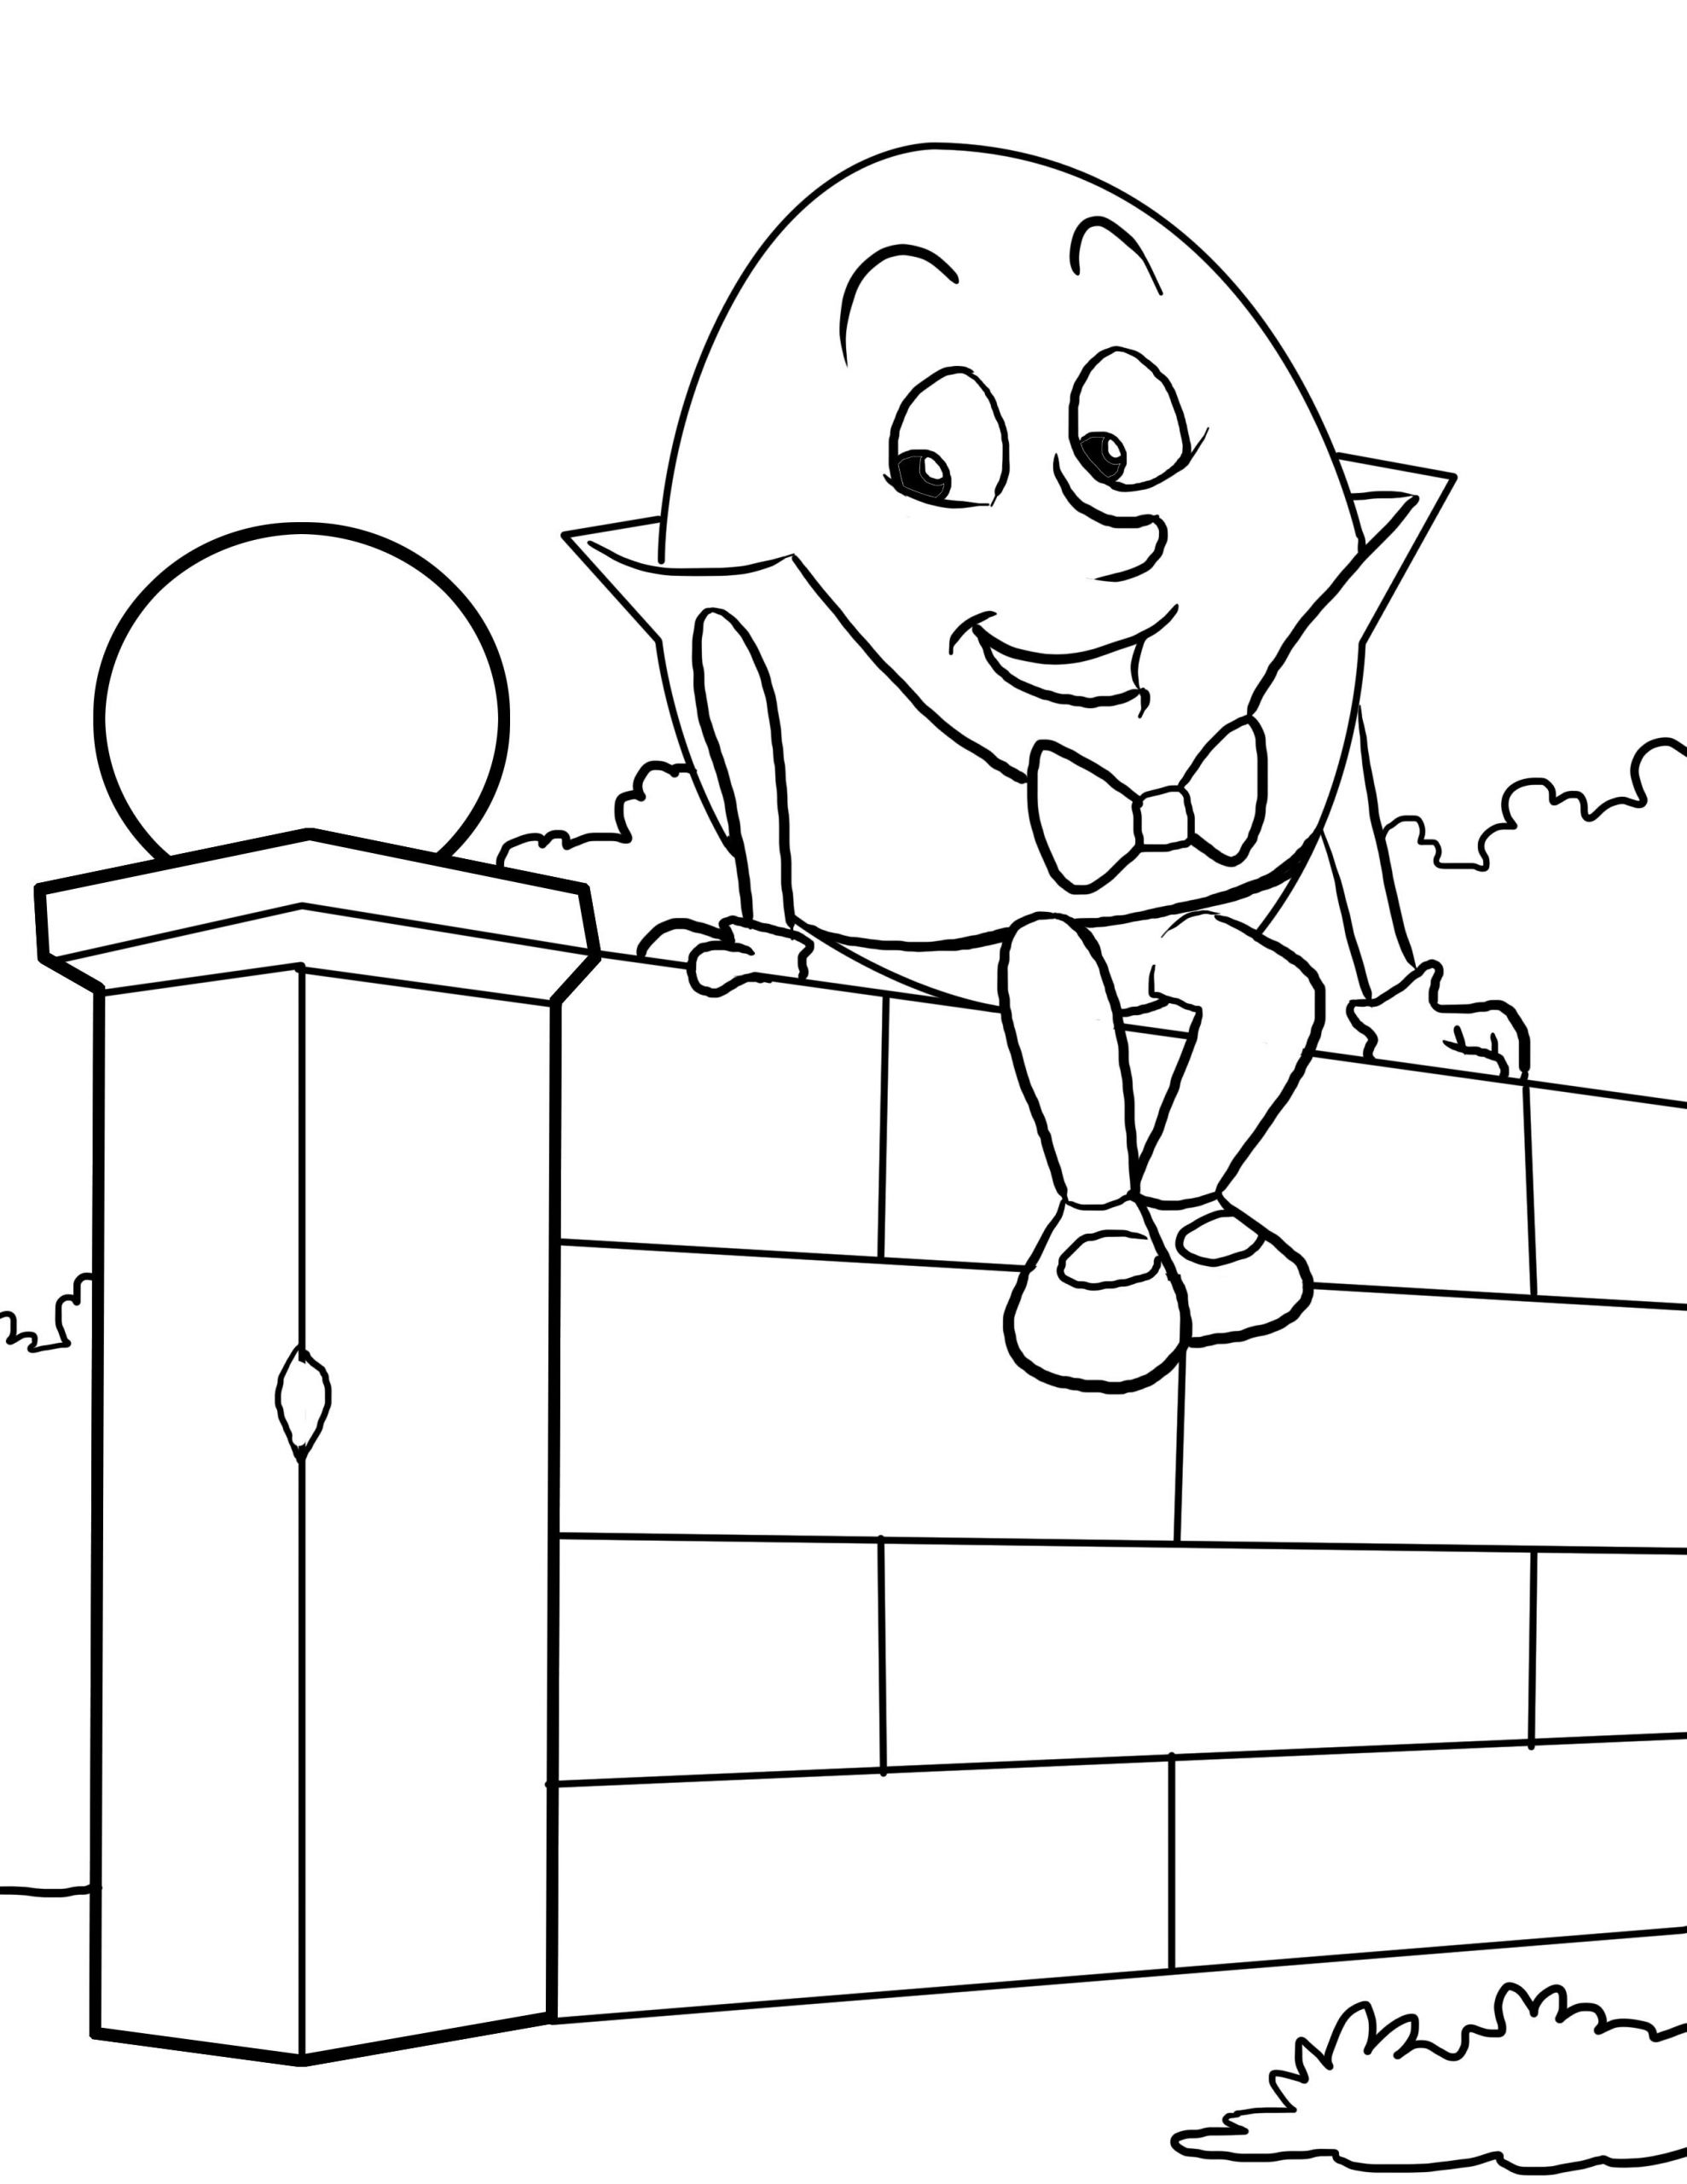 Little Baby Bum Coloring Pages
 nursery rhymes coloring pages – 2550×3300 Free Download